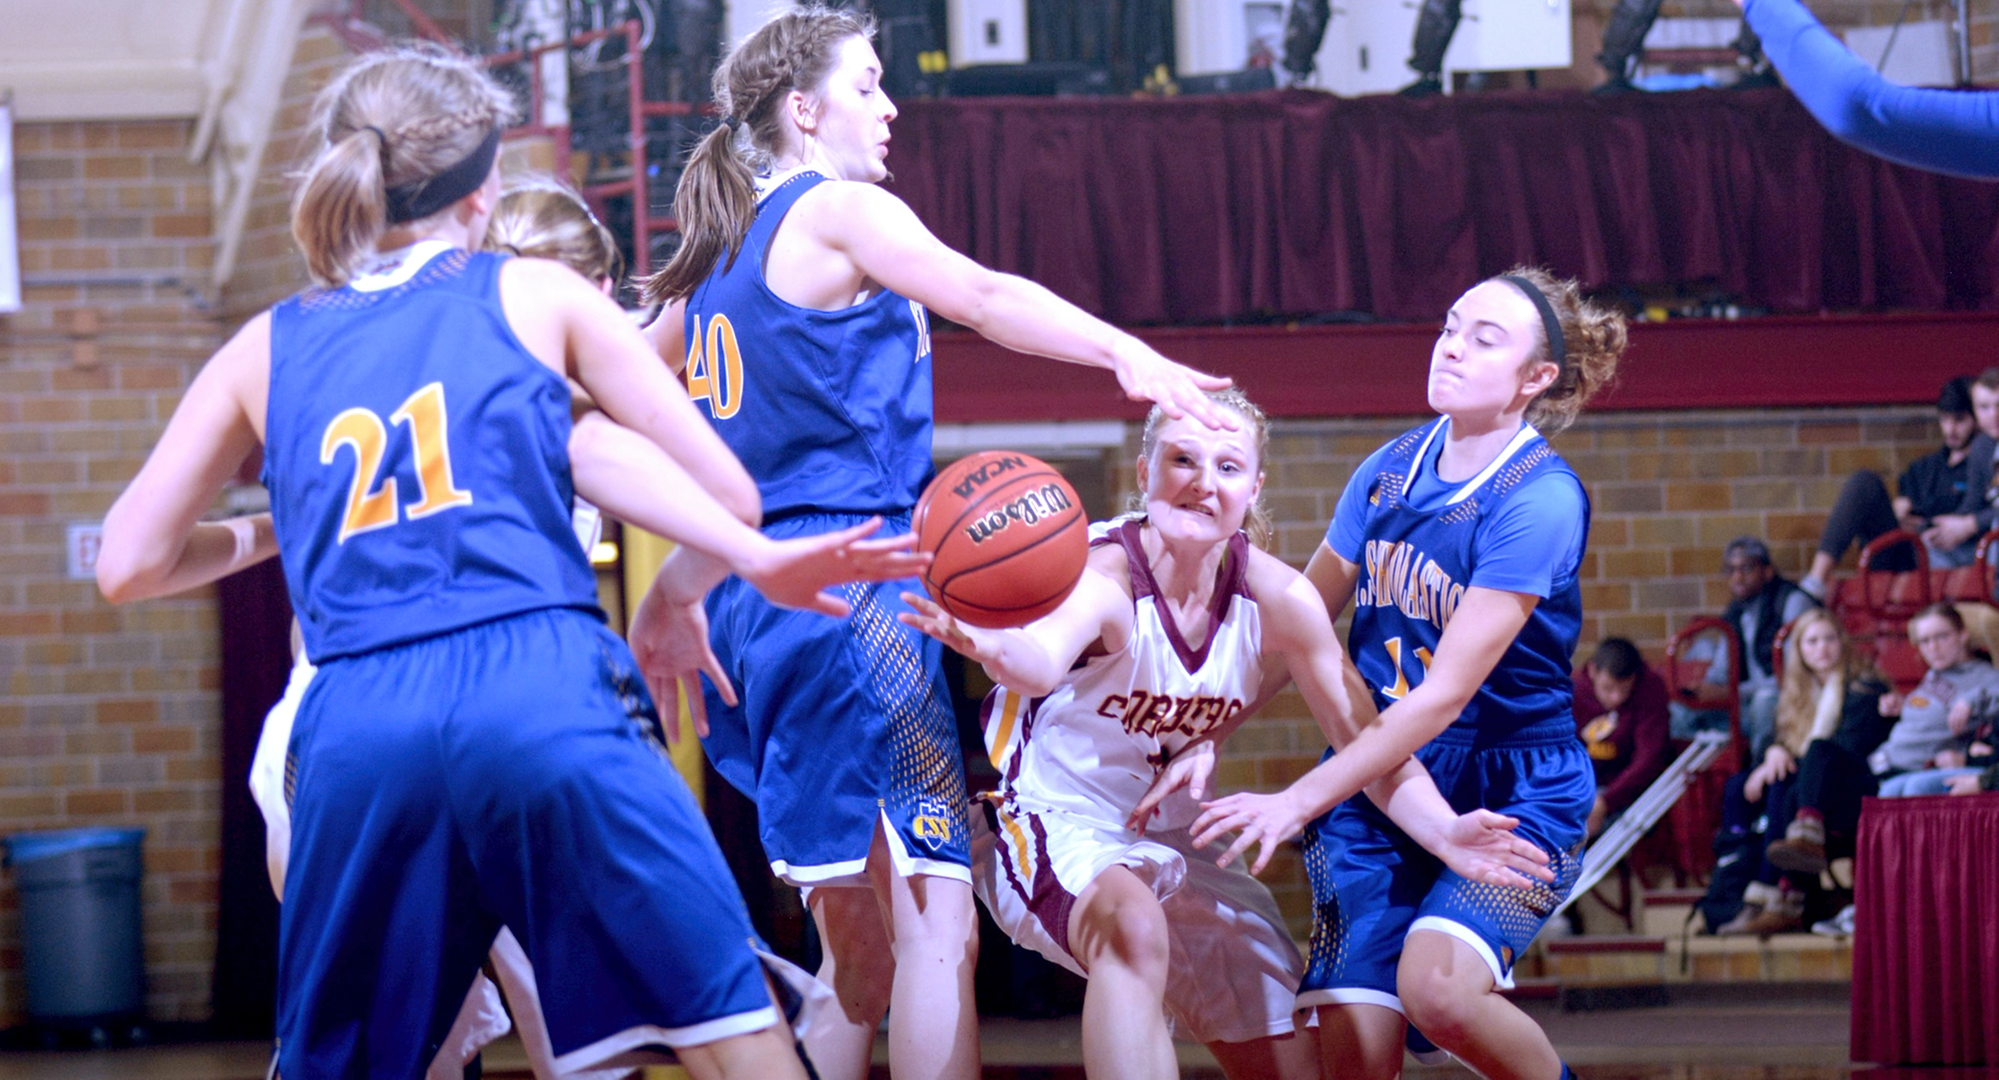 Senior Greta Walsh dishes the ball inside to one of the Cobber post players during the fourth quarter of Concordia's win against St. Scholastica.